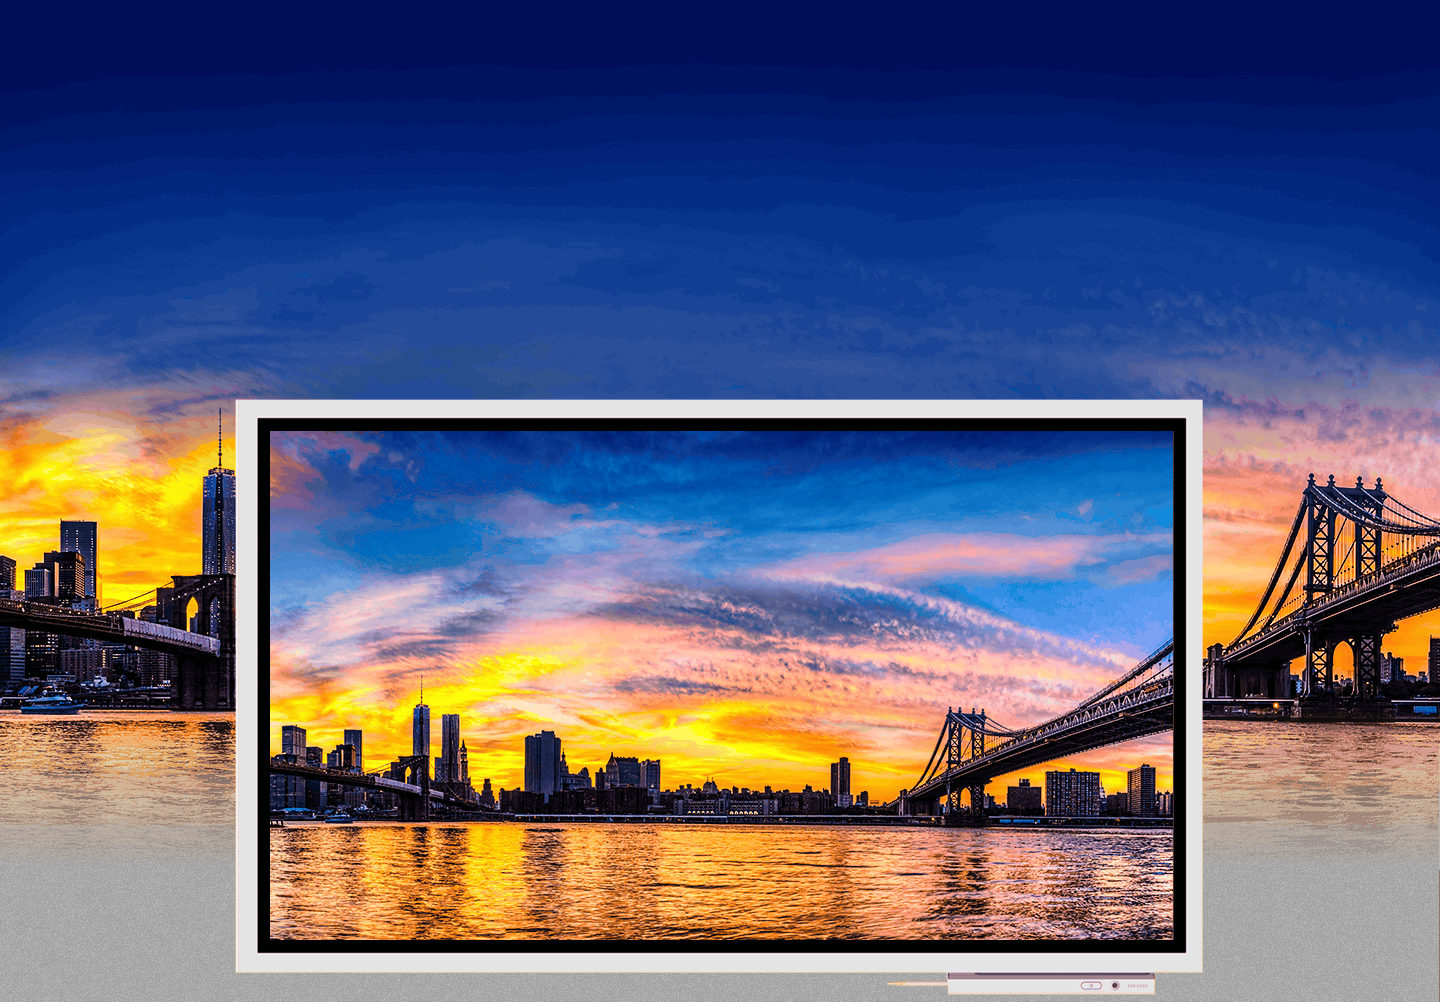 Samsung Flip - Latest Digital Whiteboard with UHD Picture quality